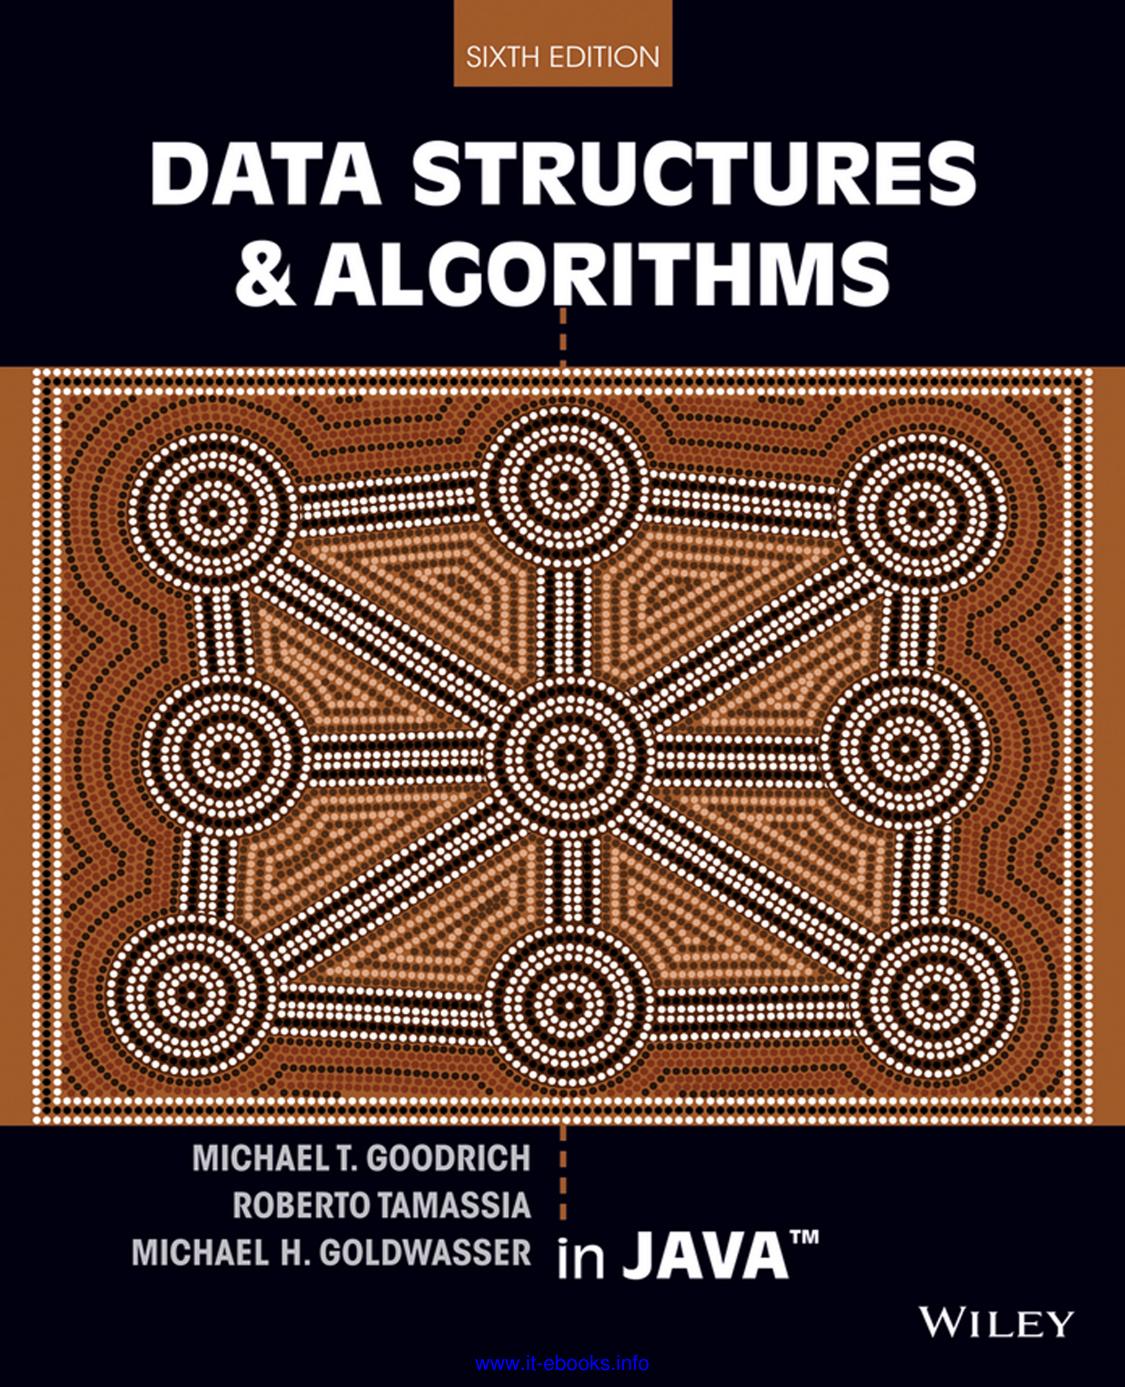 Data Structures and Algorithms in Java™